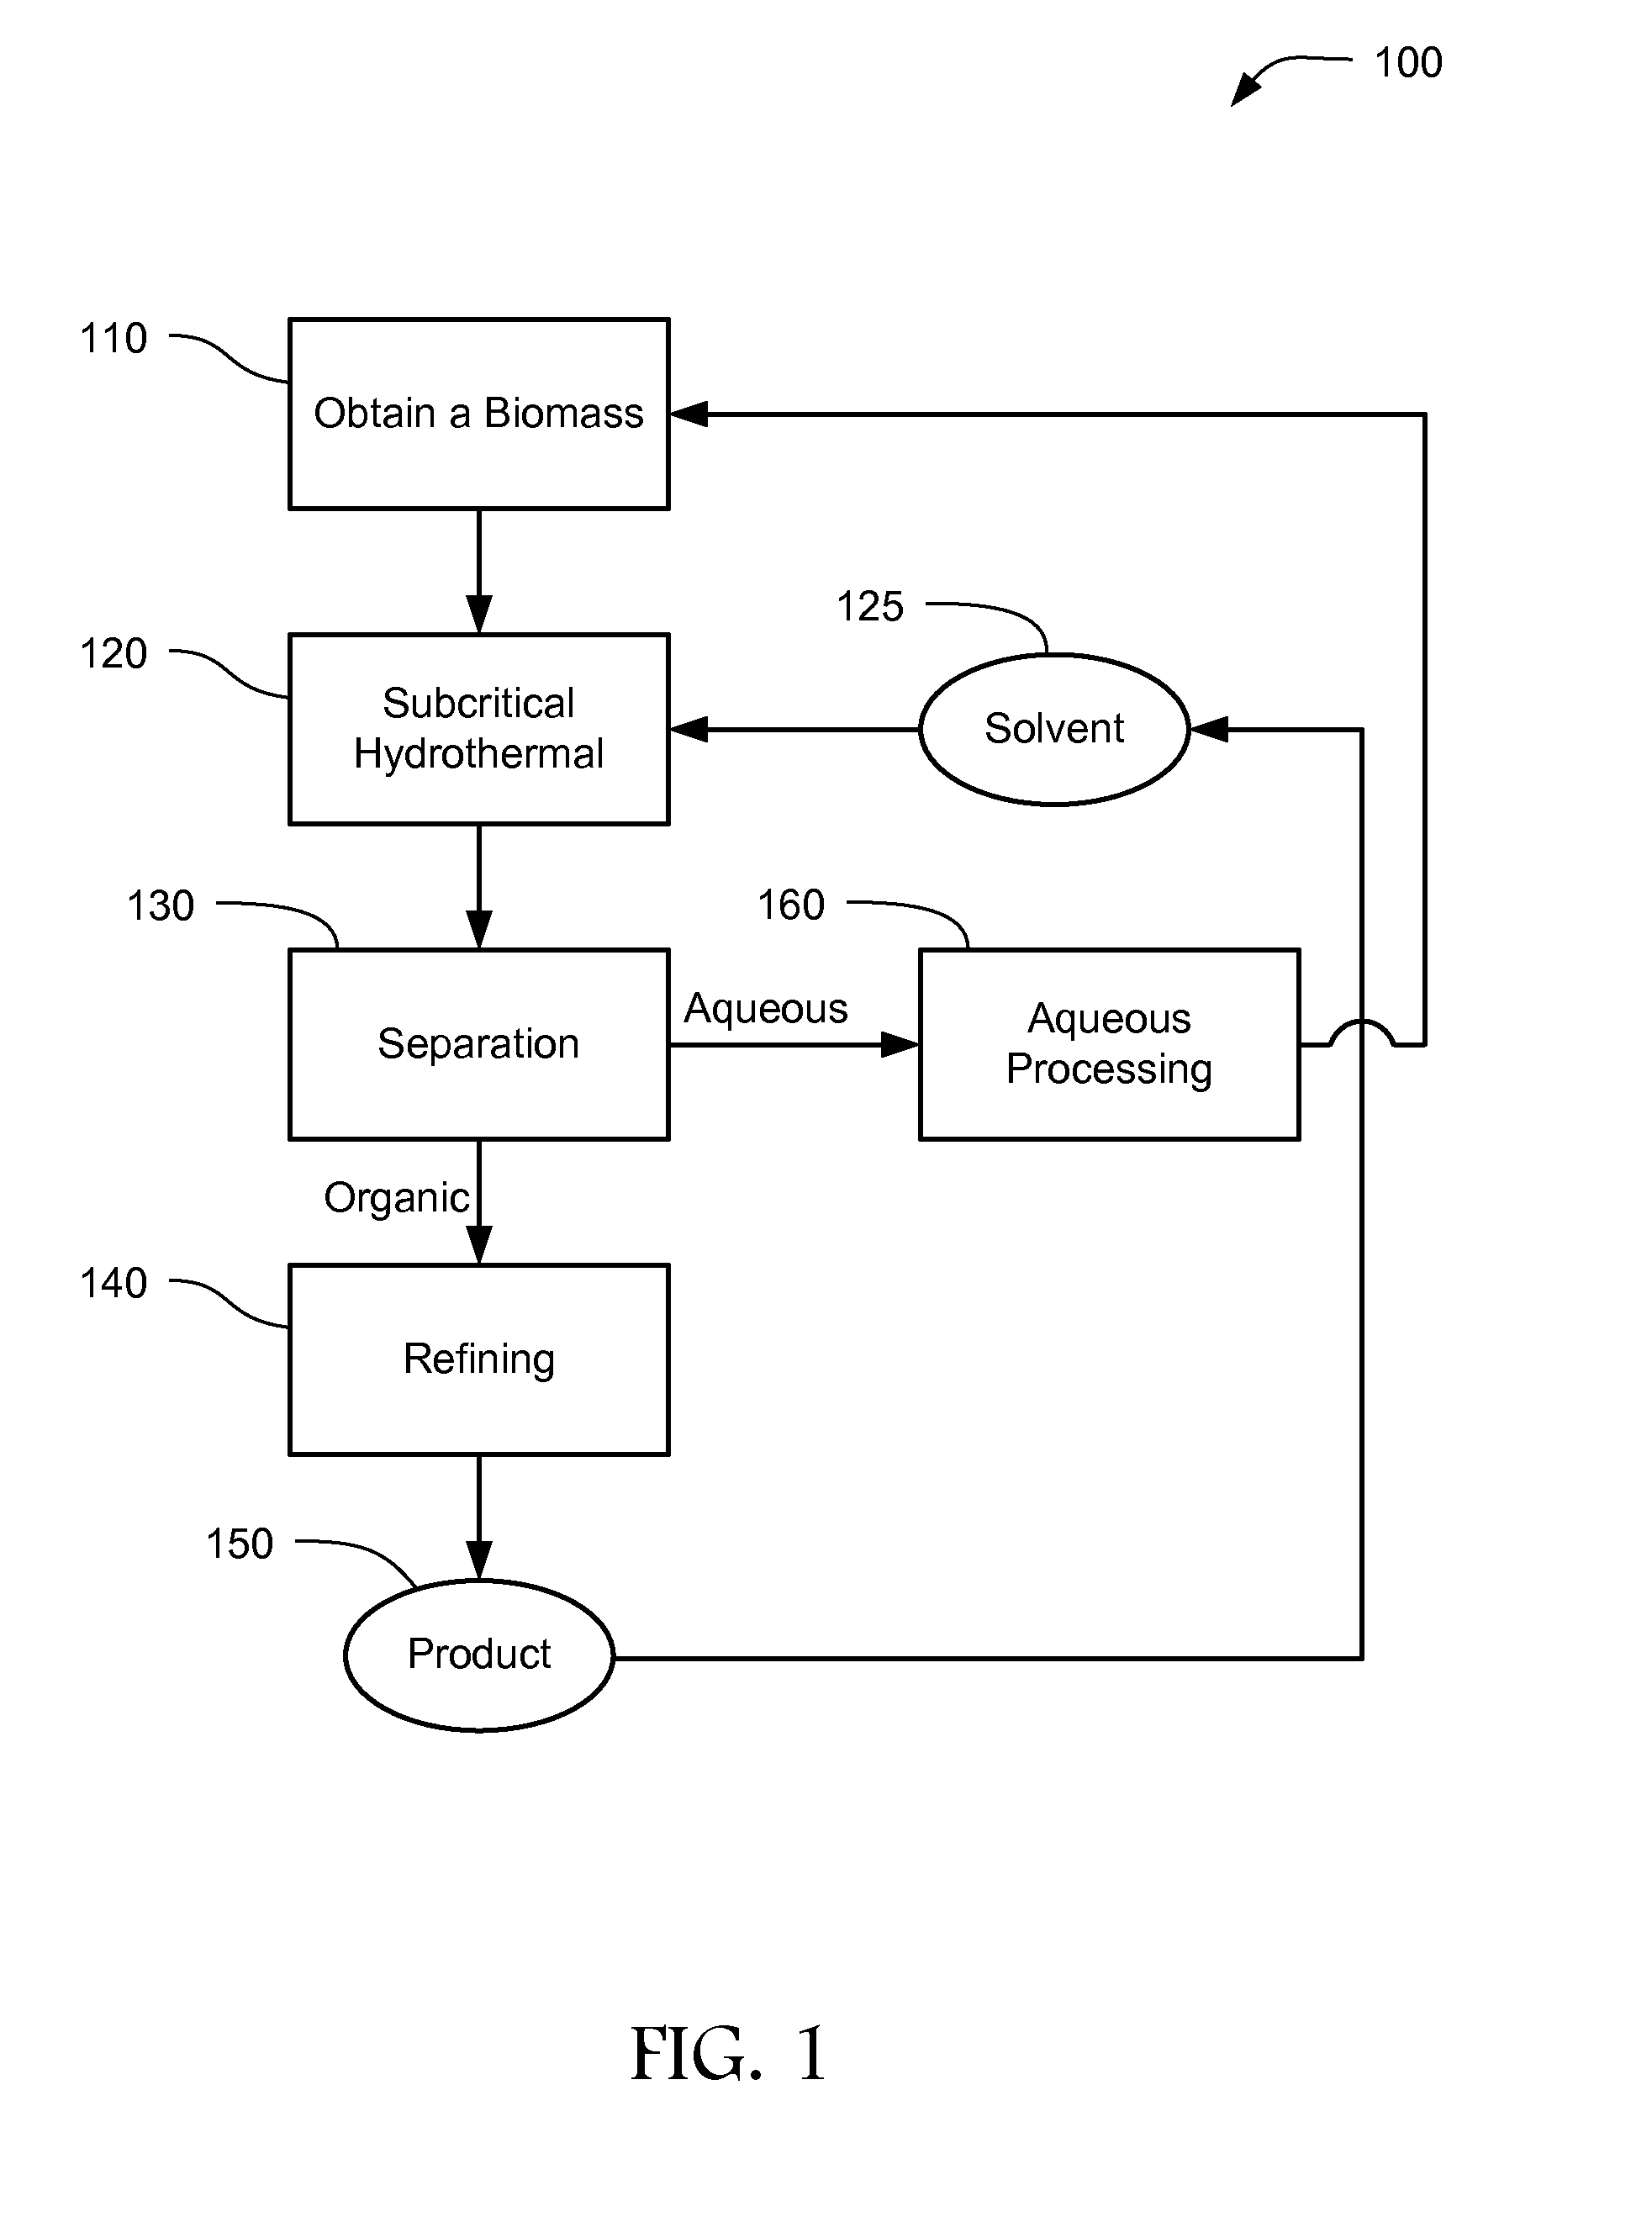 Systems and Methods for Hydrothermal Conversion of Biomass